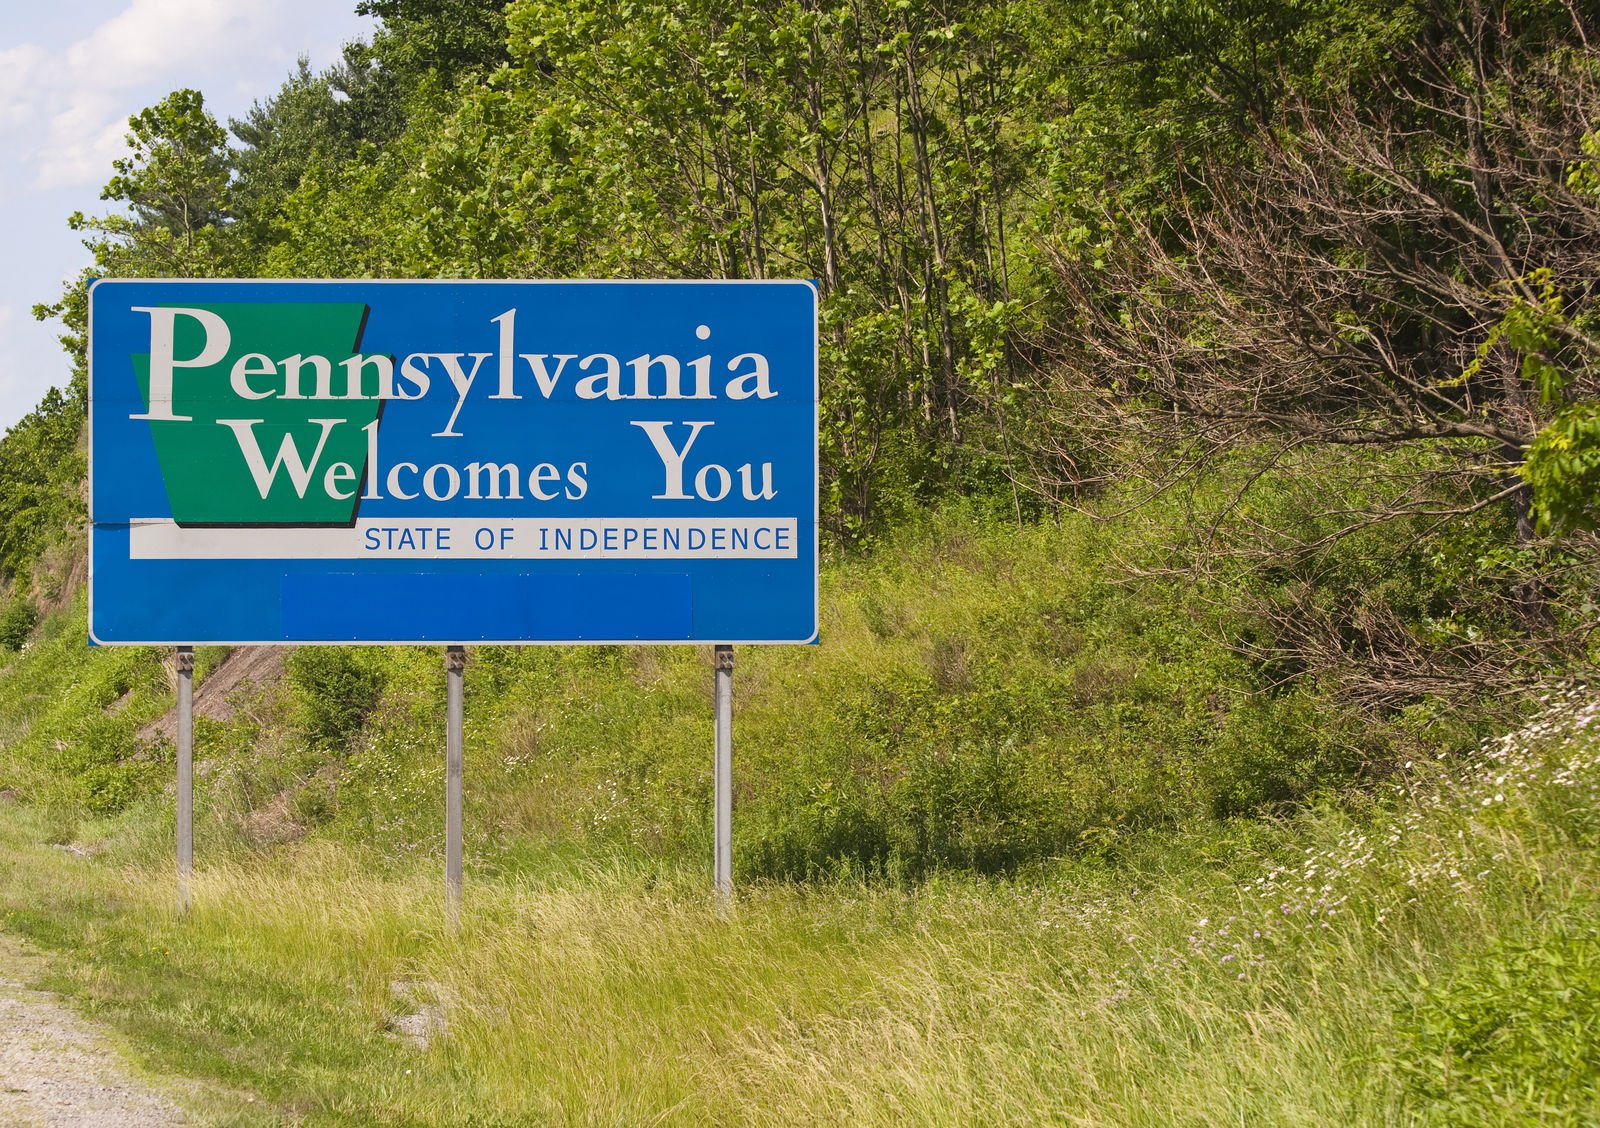 Pennsylvania Windshield Insurance: What are the full glass coverage laws in Pennsylvania?